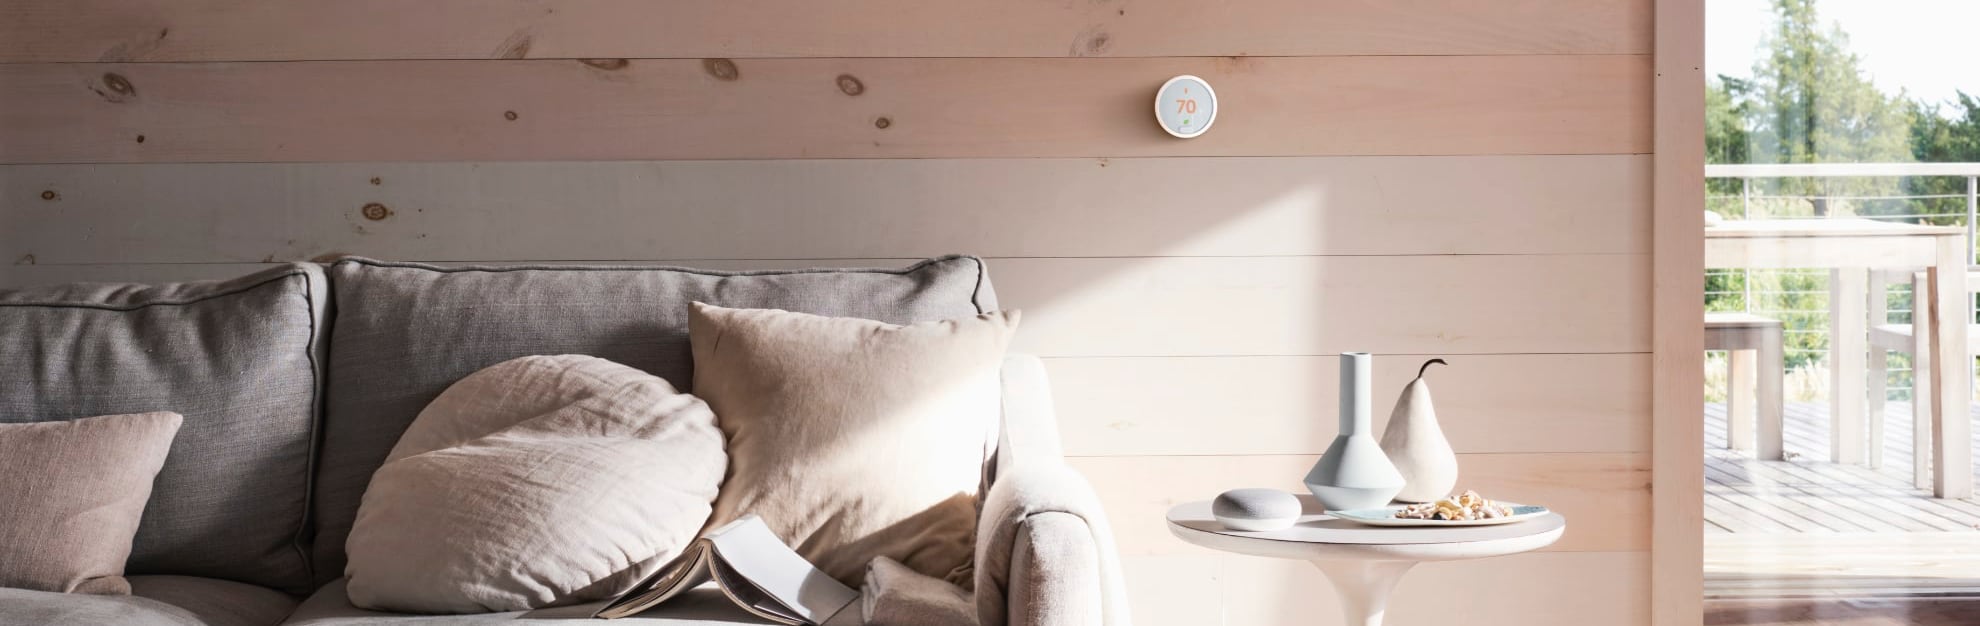 Vivint Home Automation in Palm Springs